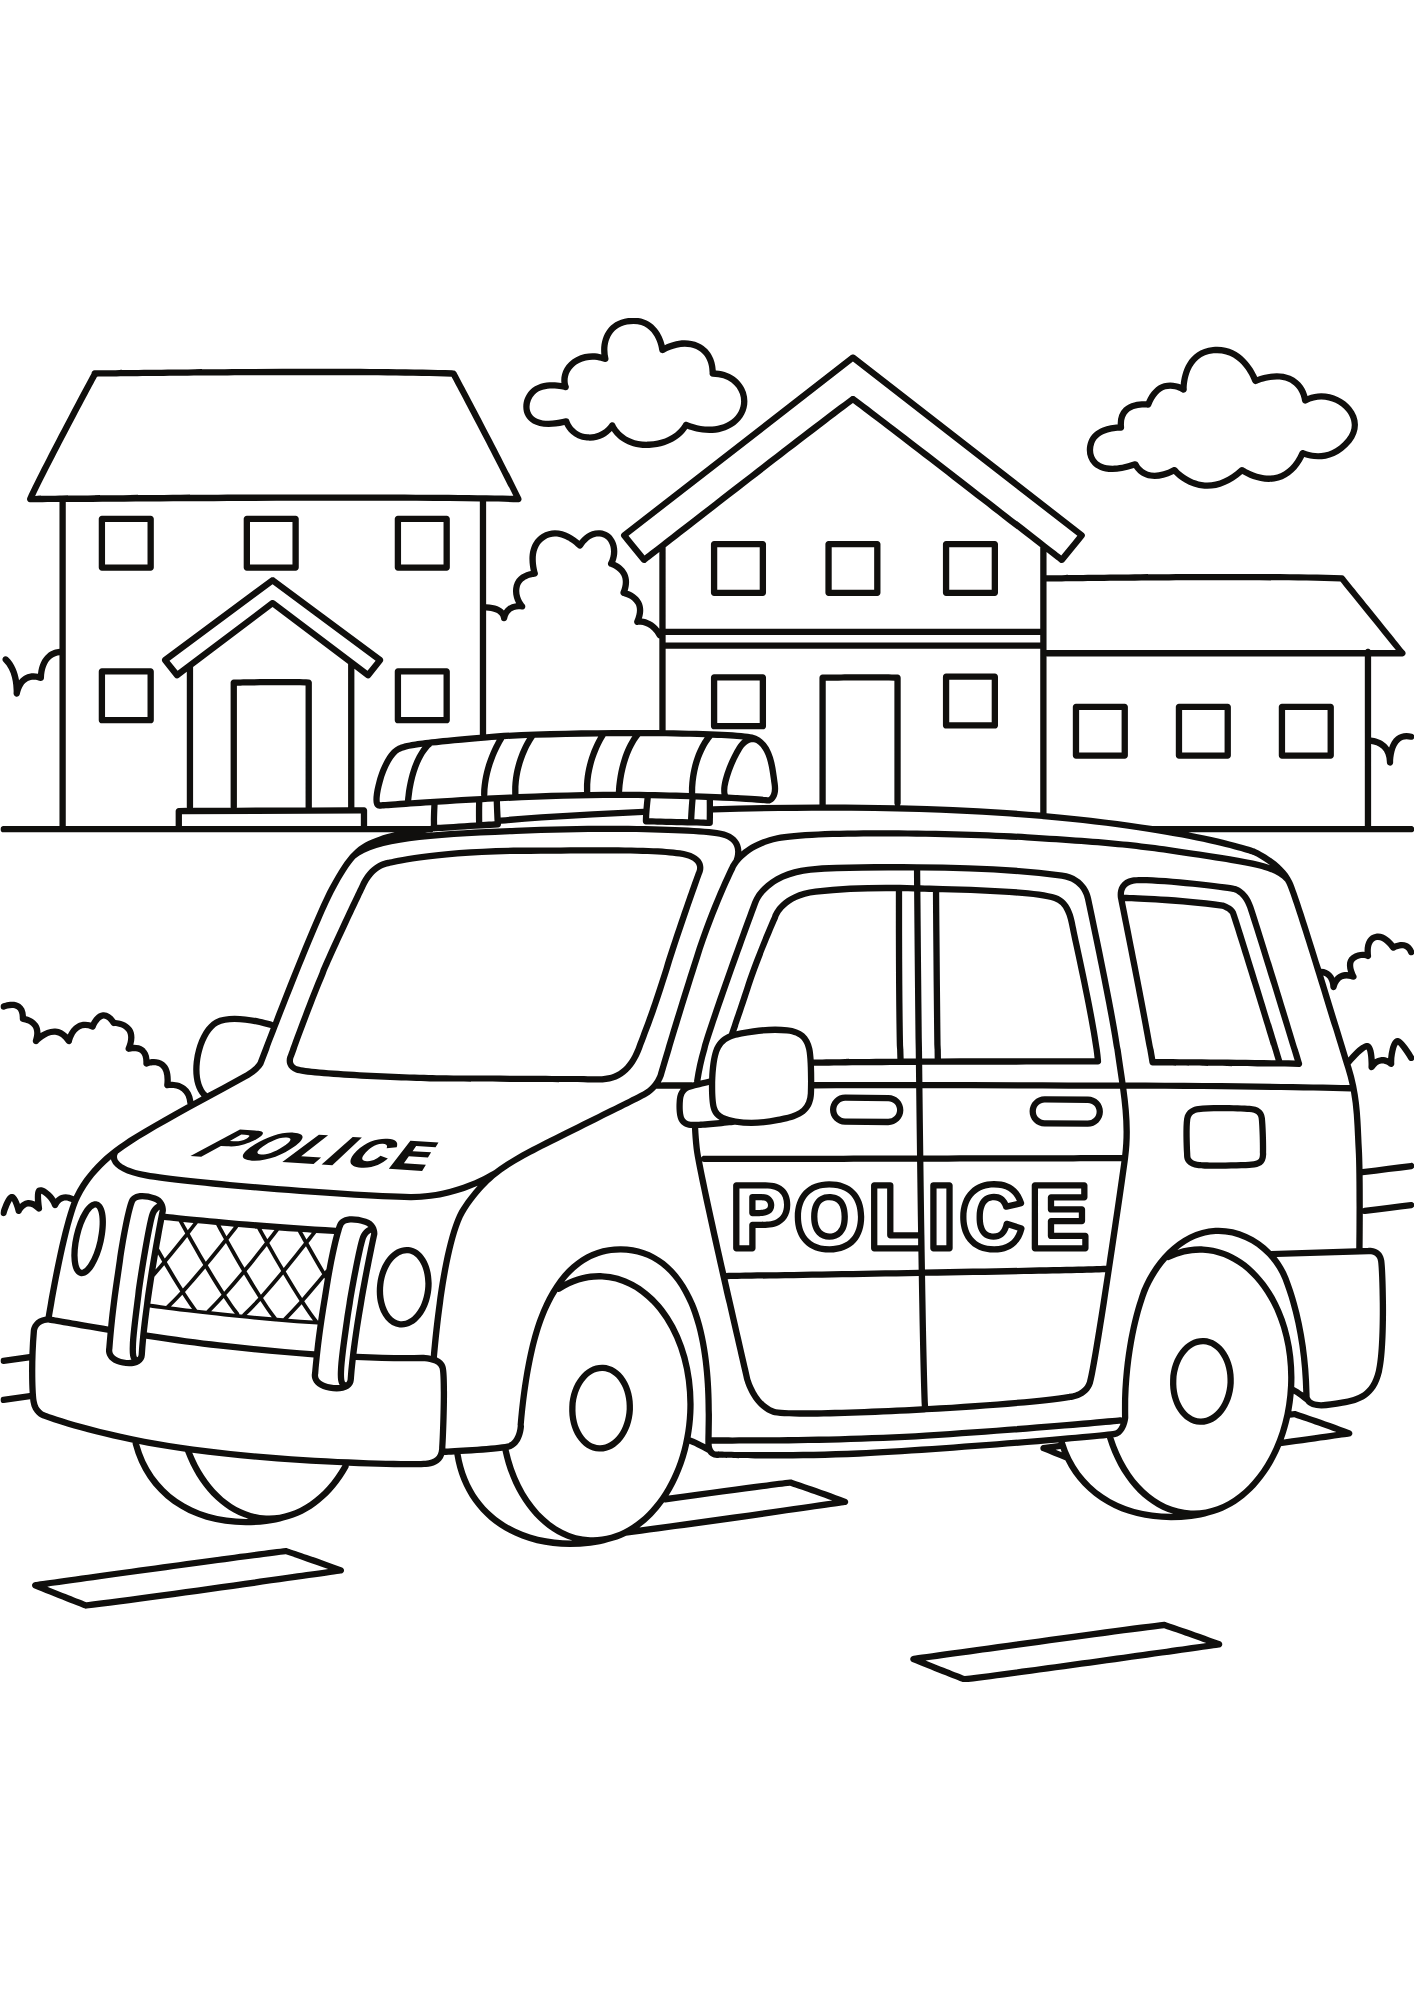 Big Police car Coloring Pages